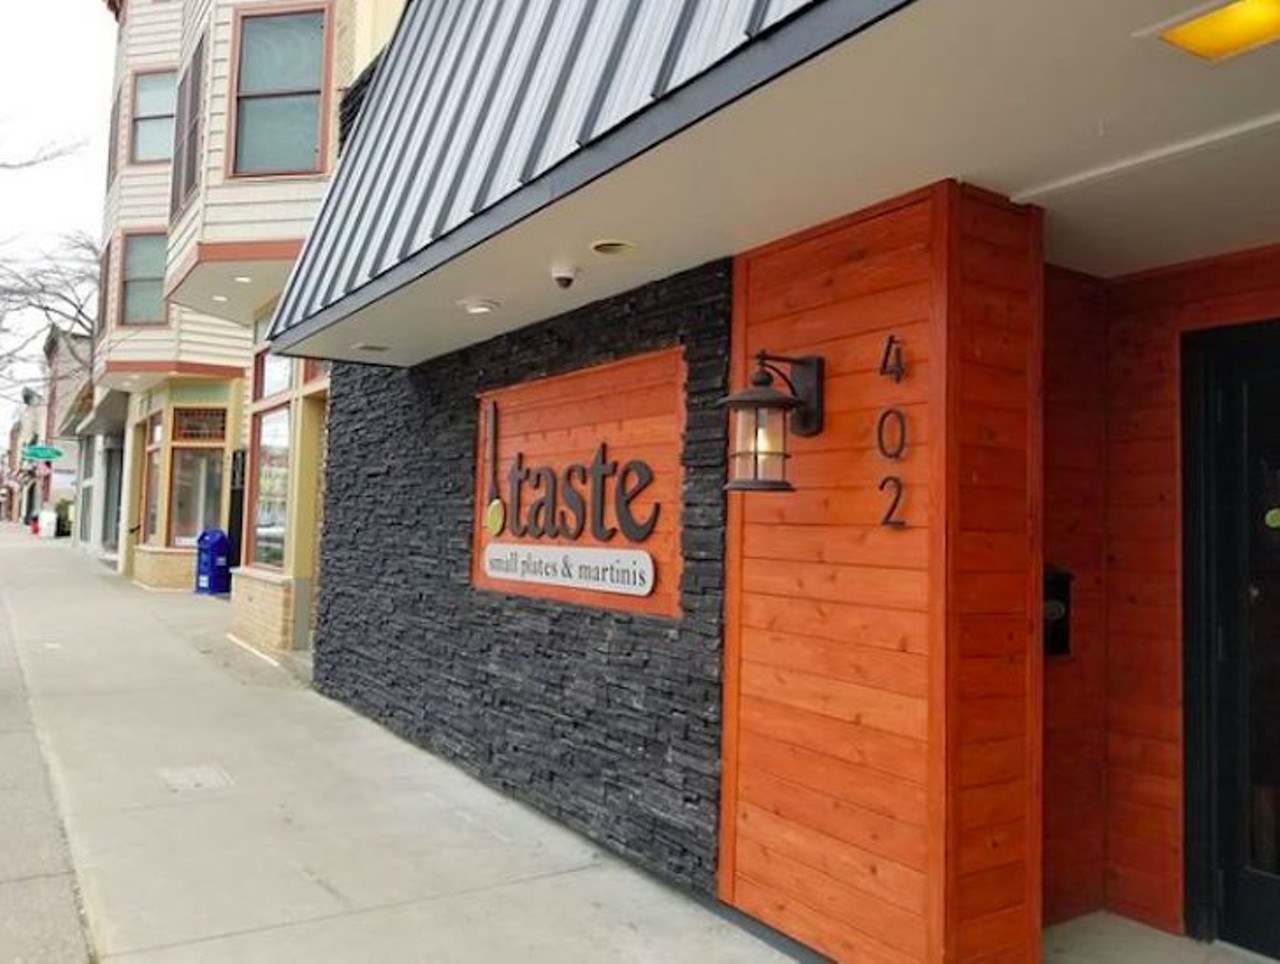 Taste
402 Phoenix St., South Haven, 269-637-0010, tastesouthhaven.com
This love-driven restaurant is owned by couple Chef Joel and Heidi Gesiakowski, known for their unique dishes and martinis.
Photo via Taste/Instagram